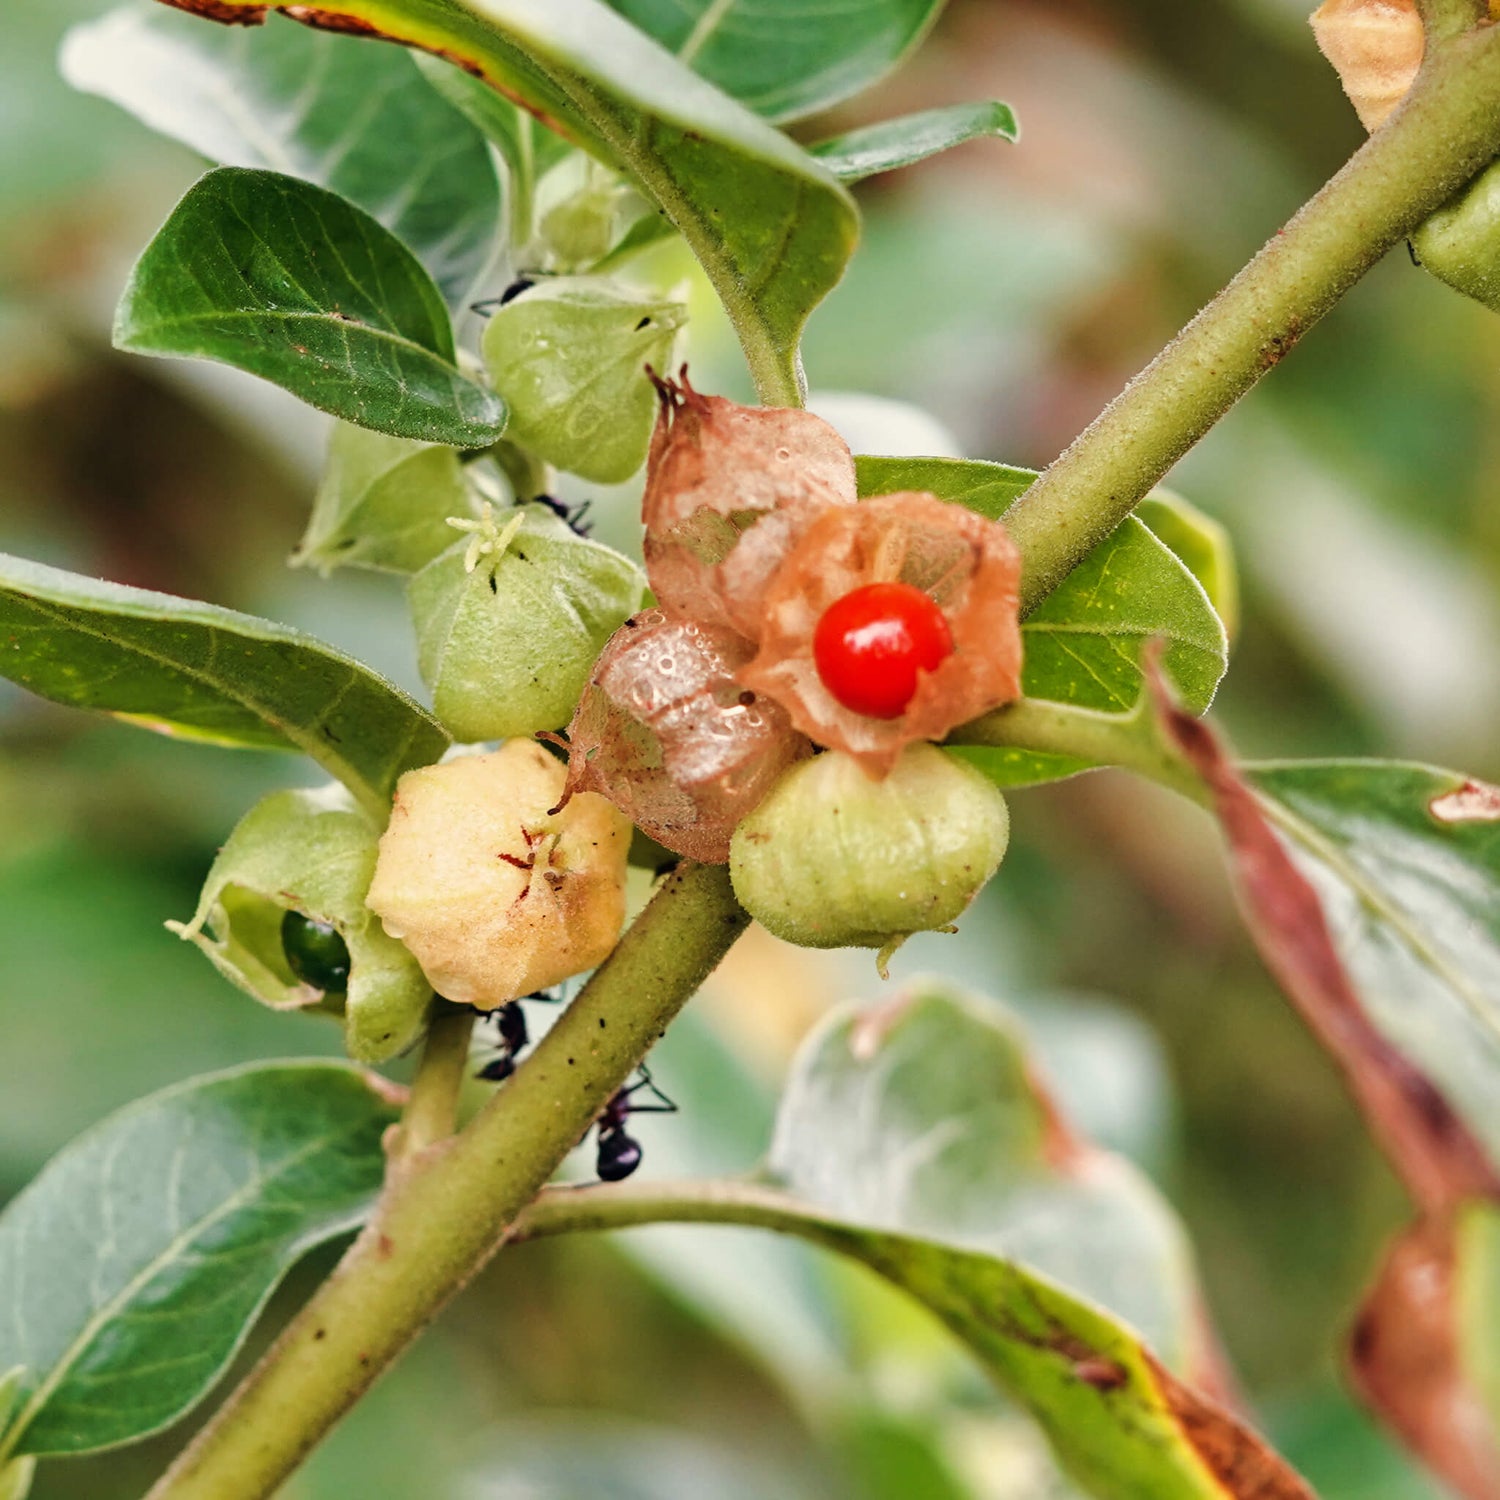 A cluster of berries on a green stem